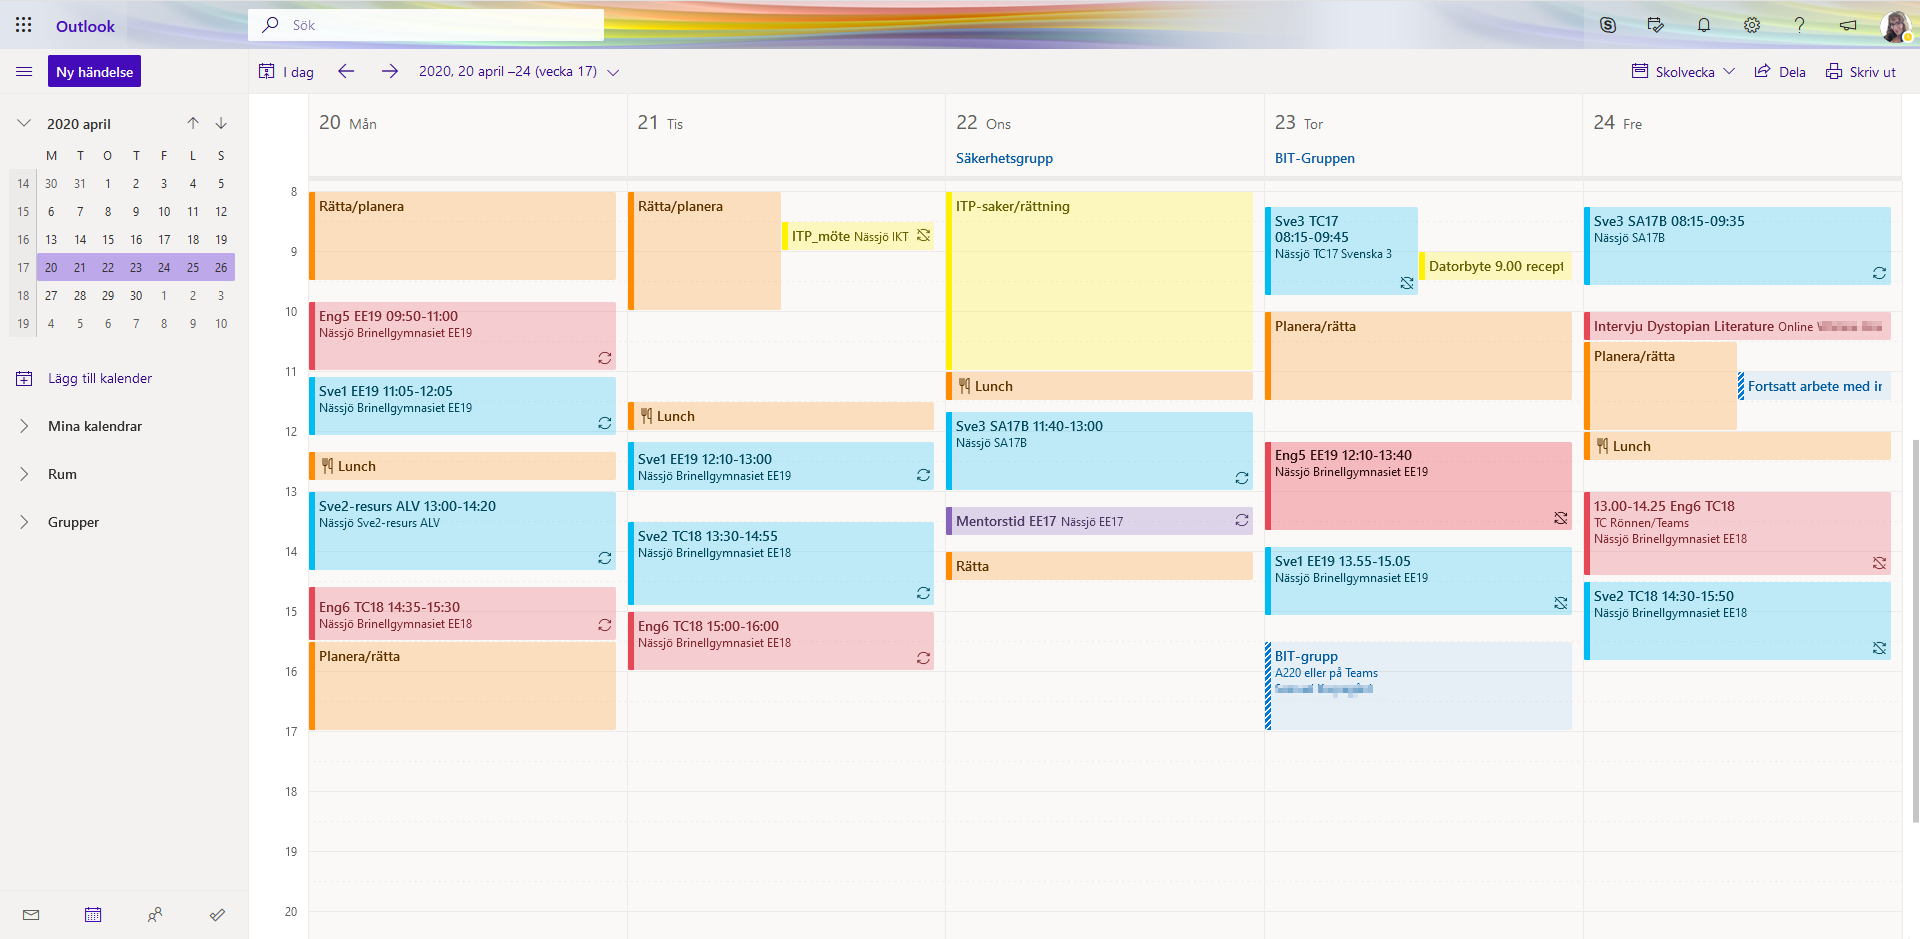 Calendar sample of my work week during spring 2020 as seen from the webversion of Office 365